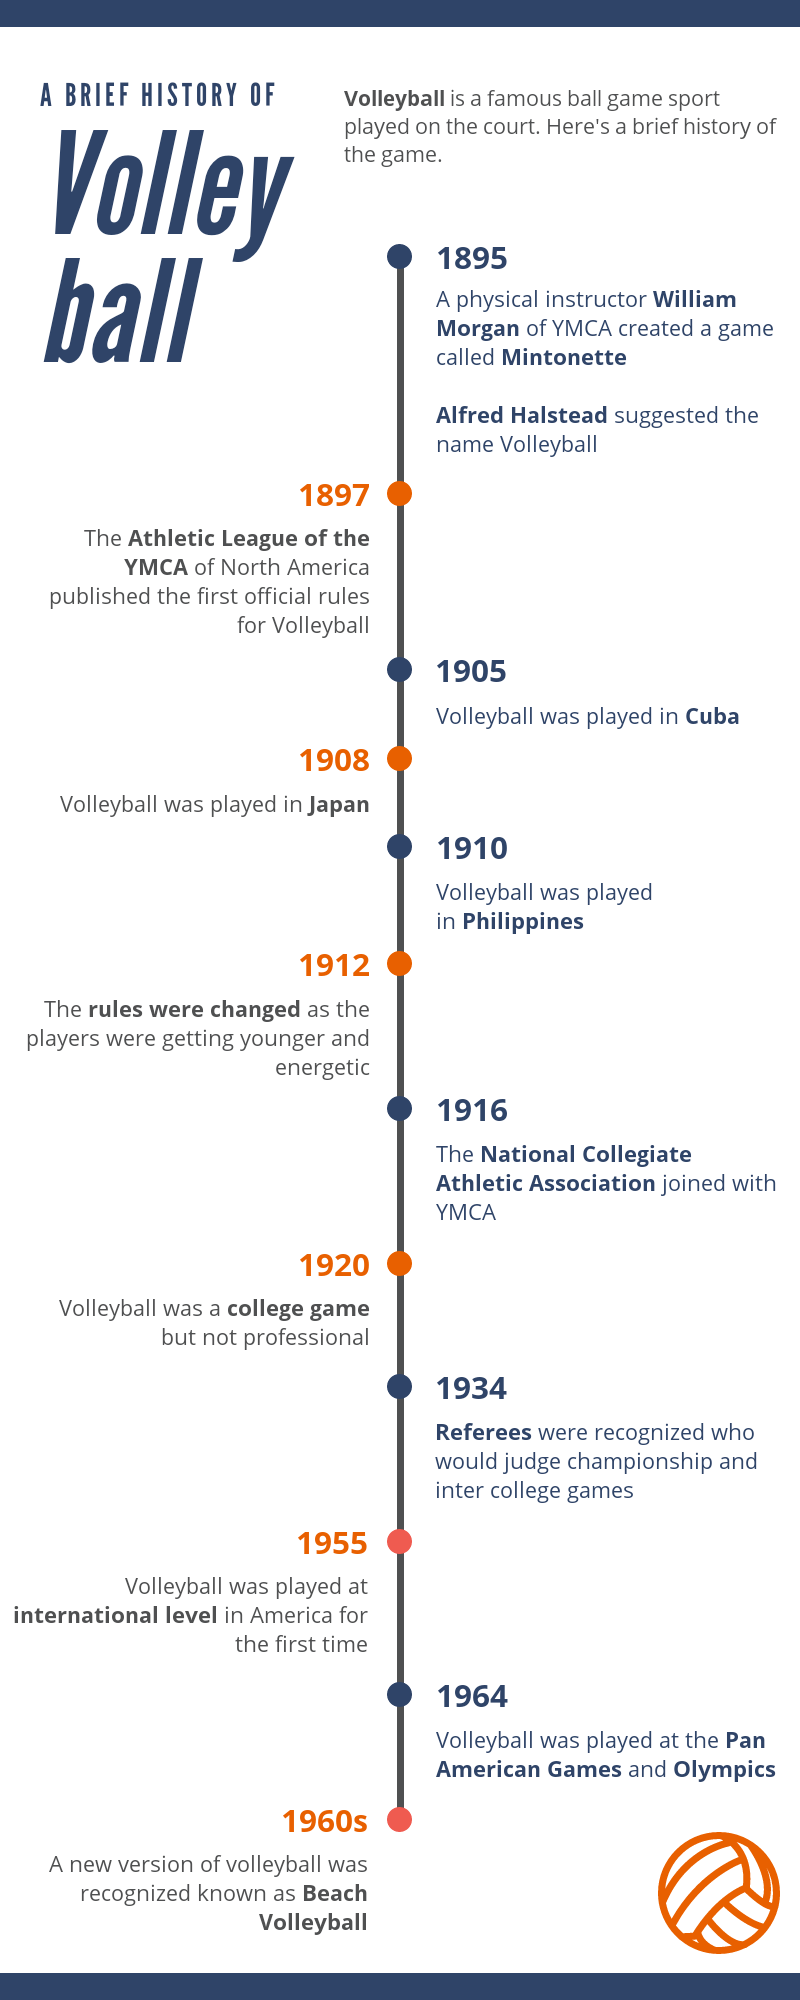 The Brief History of Volleyball